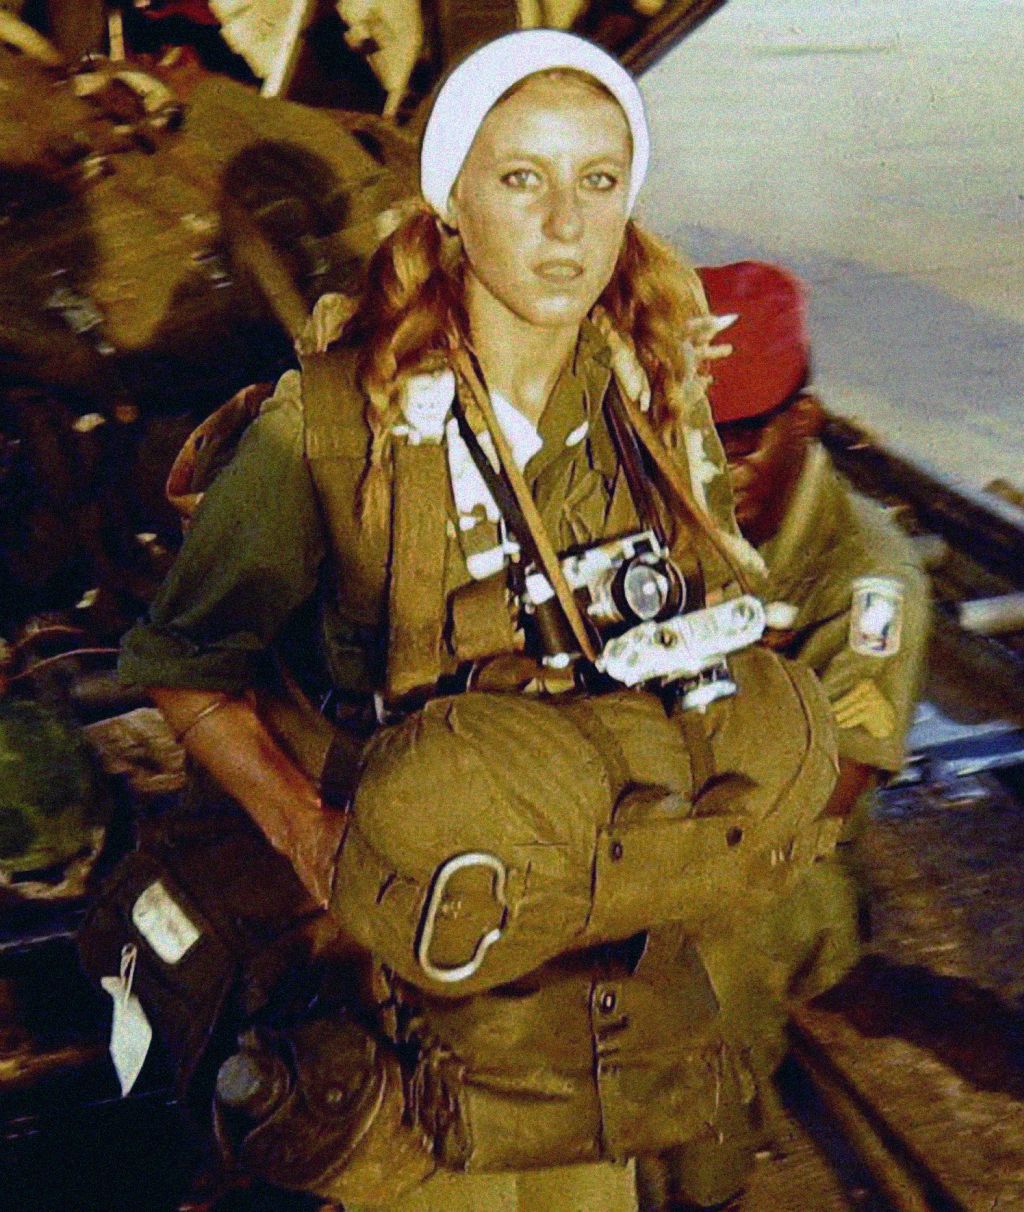 Catherine Leroy was the only journalist qualified to jump with the Army Airborne and was the only photographer on the largest operation of the war